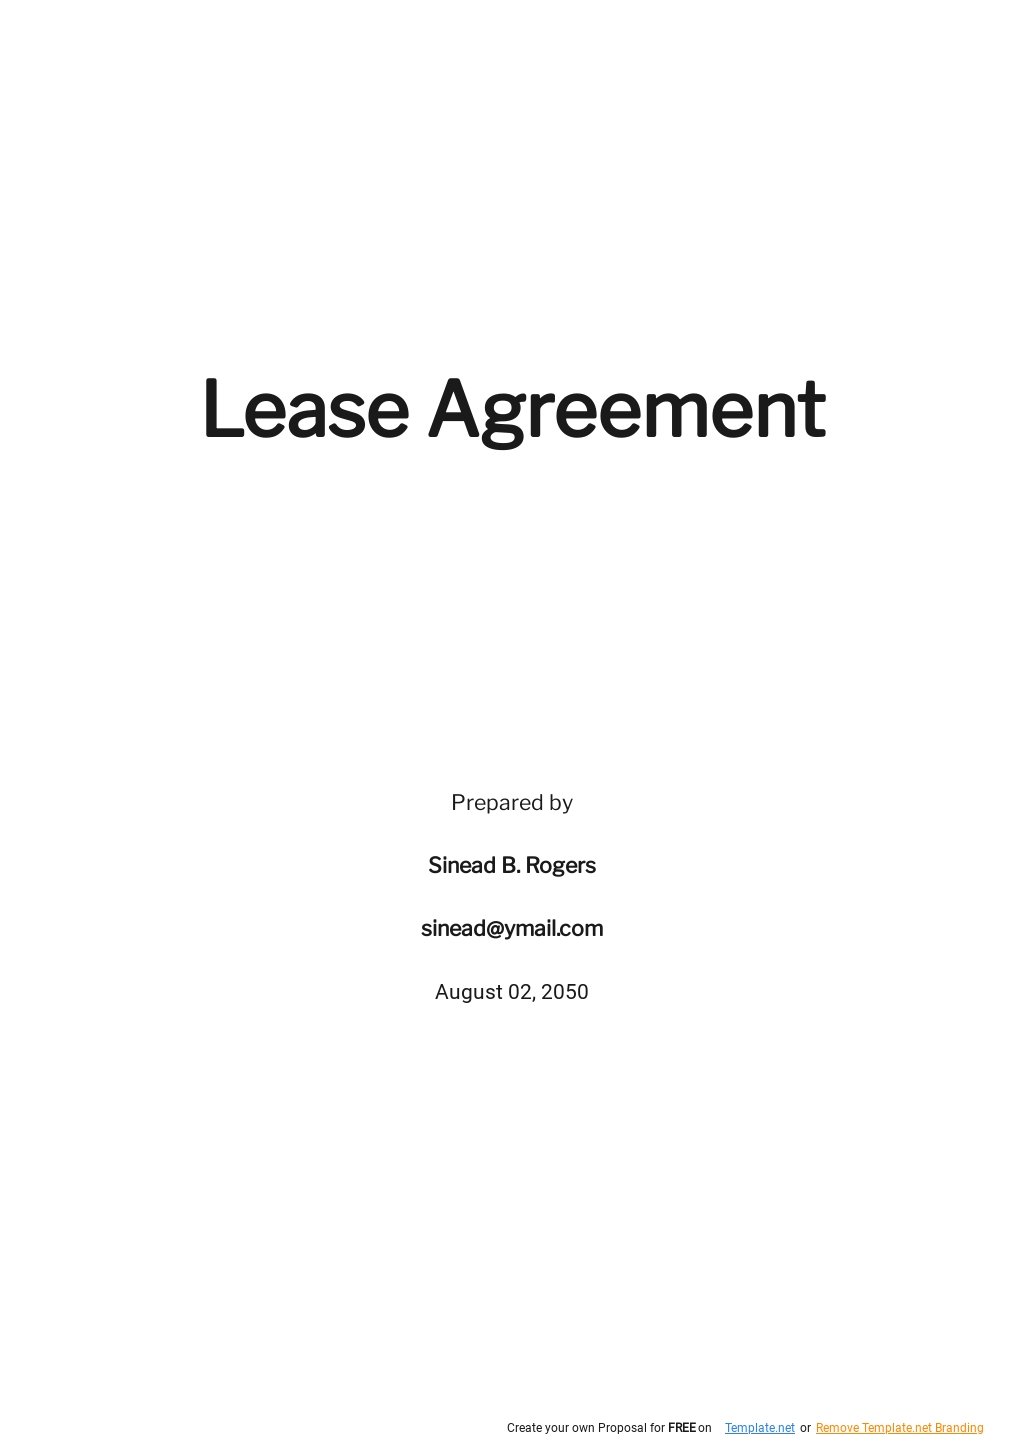 Lease Agreement Template.jpe